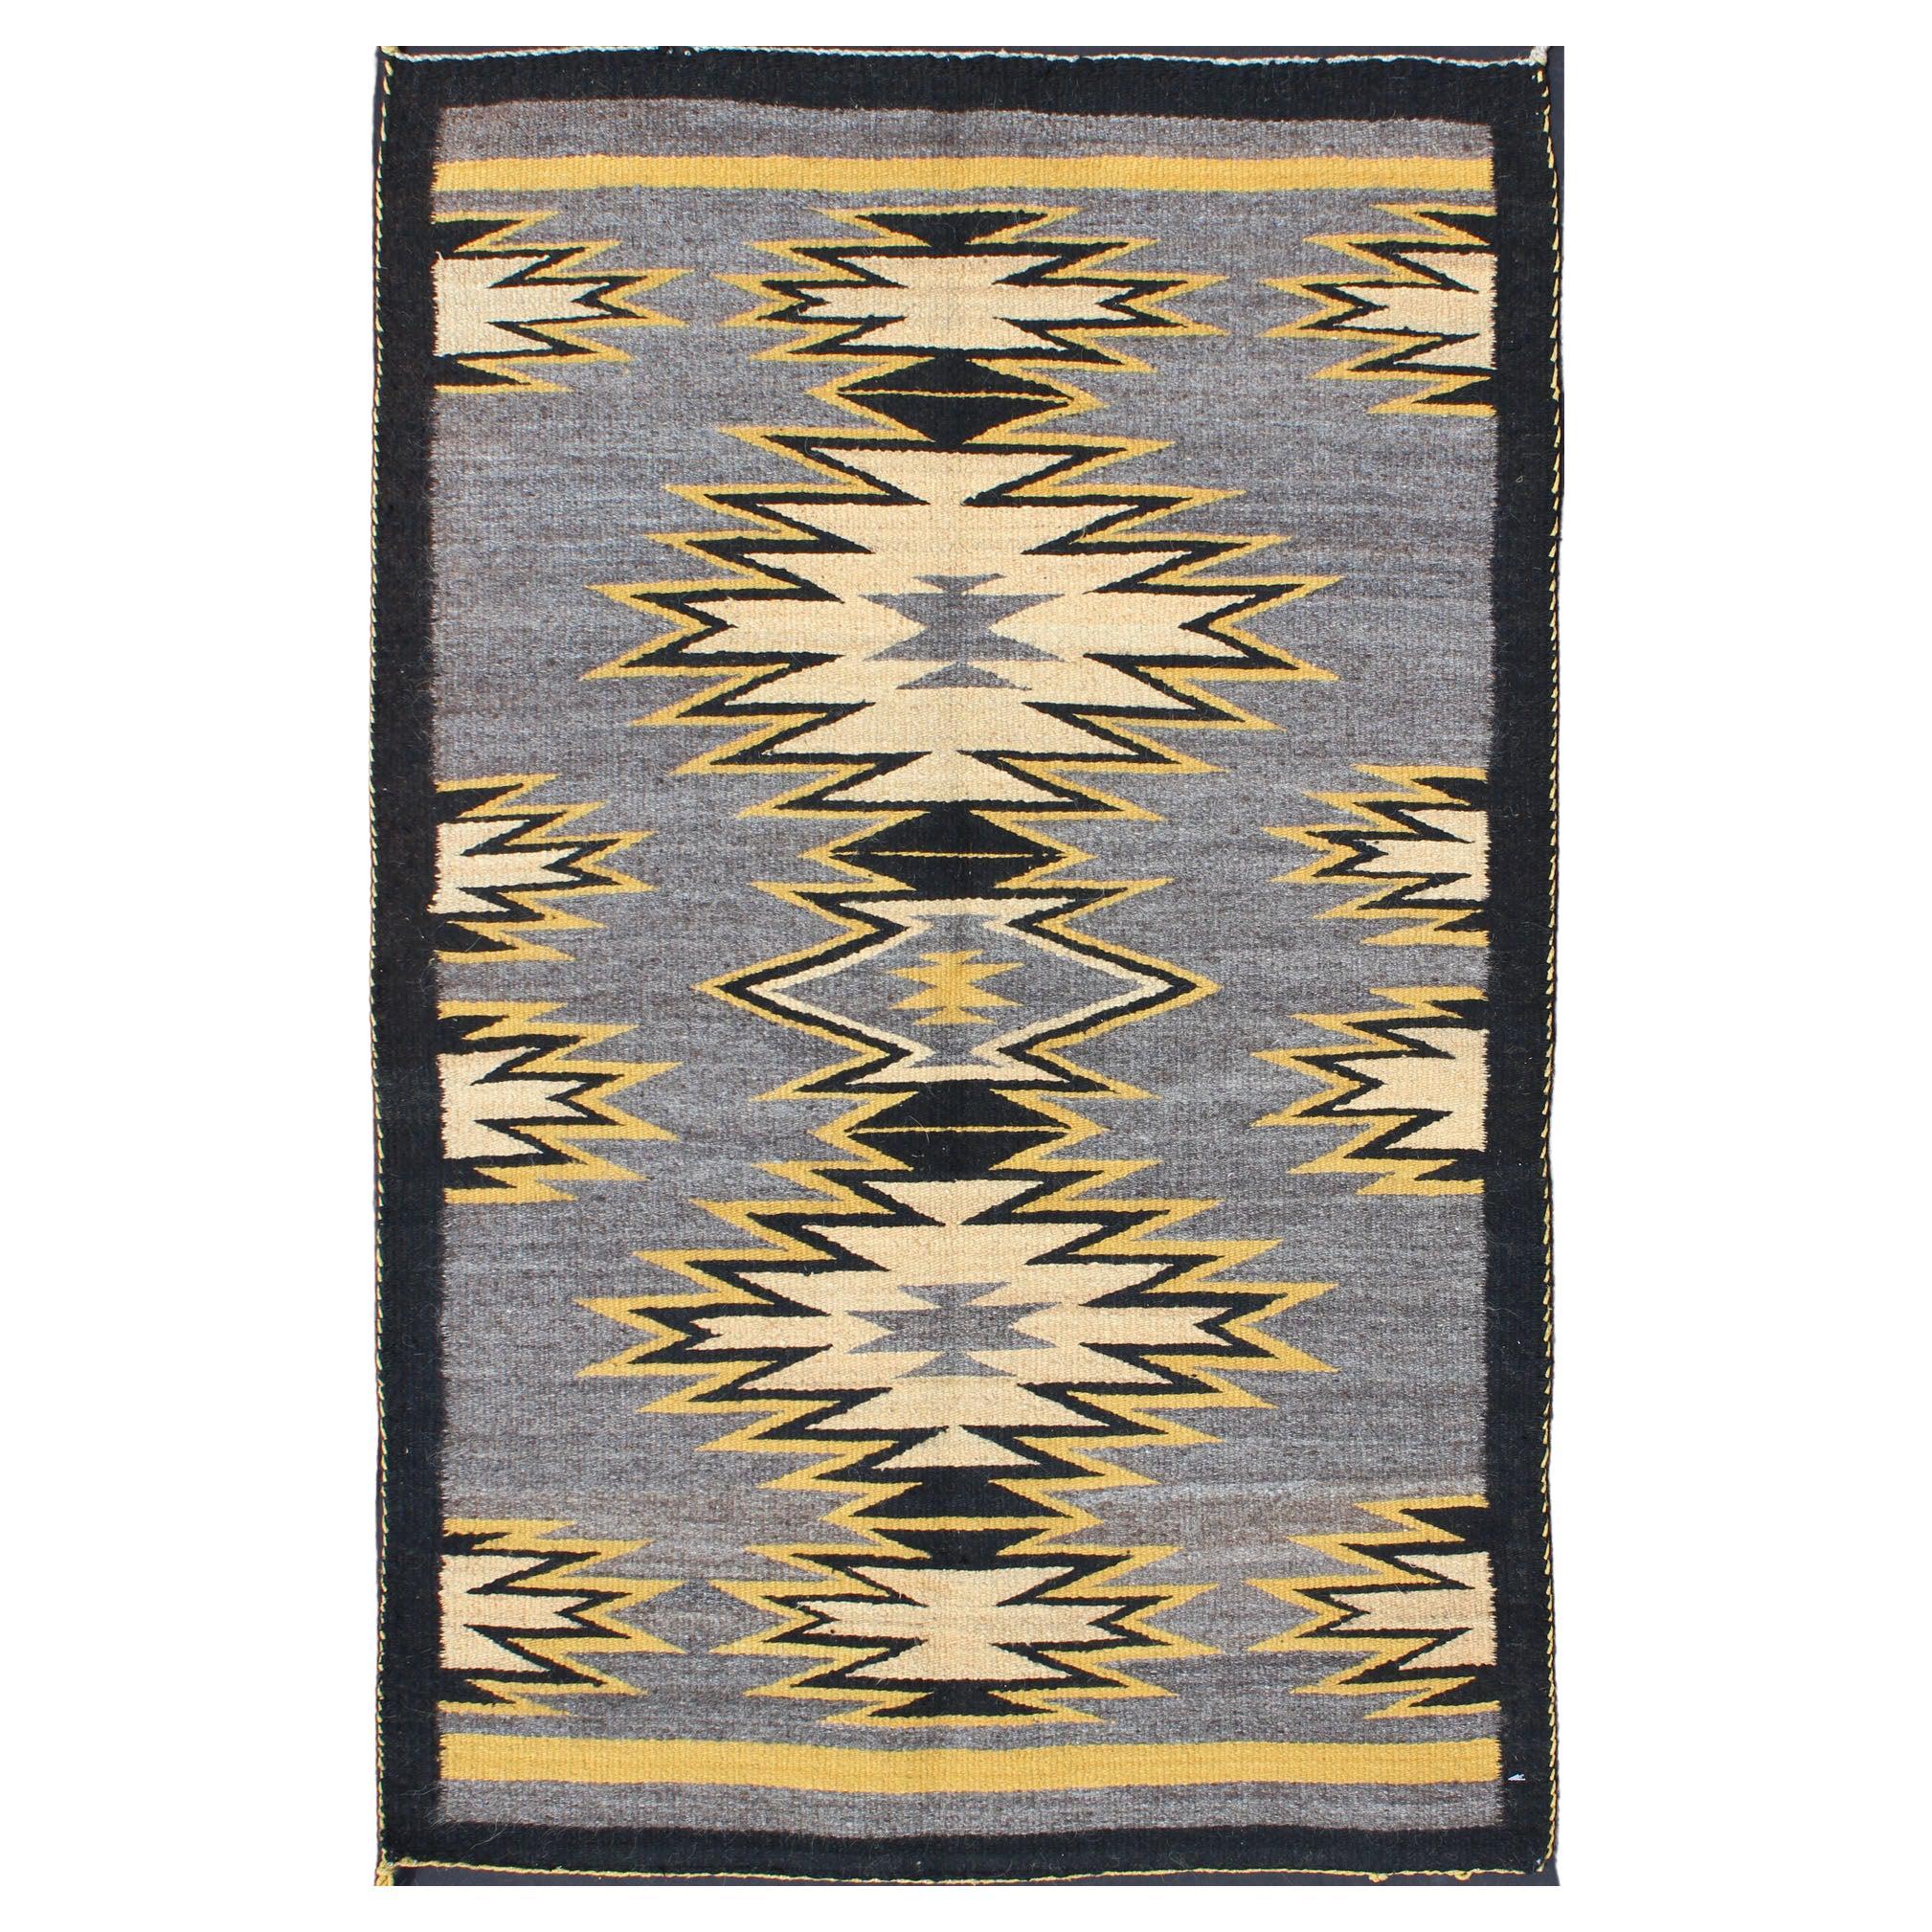 Geometric Multi Medallion Tribal Navajo Rug with Cream, Gold, Gray and Black For Sale